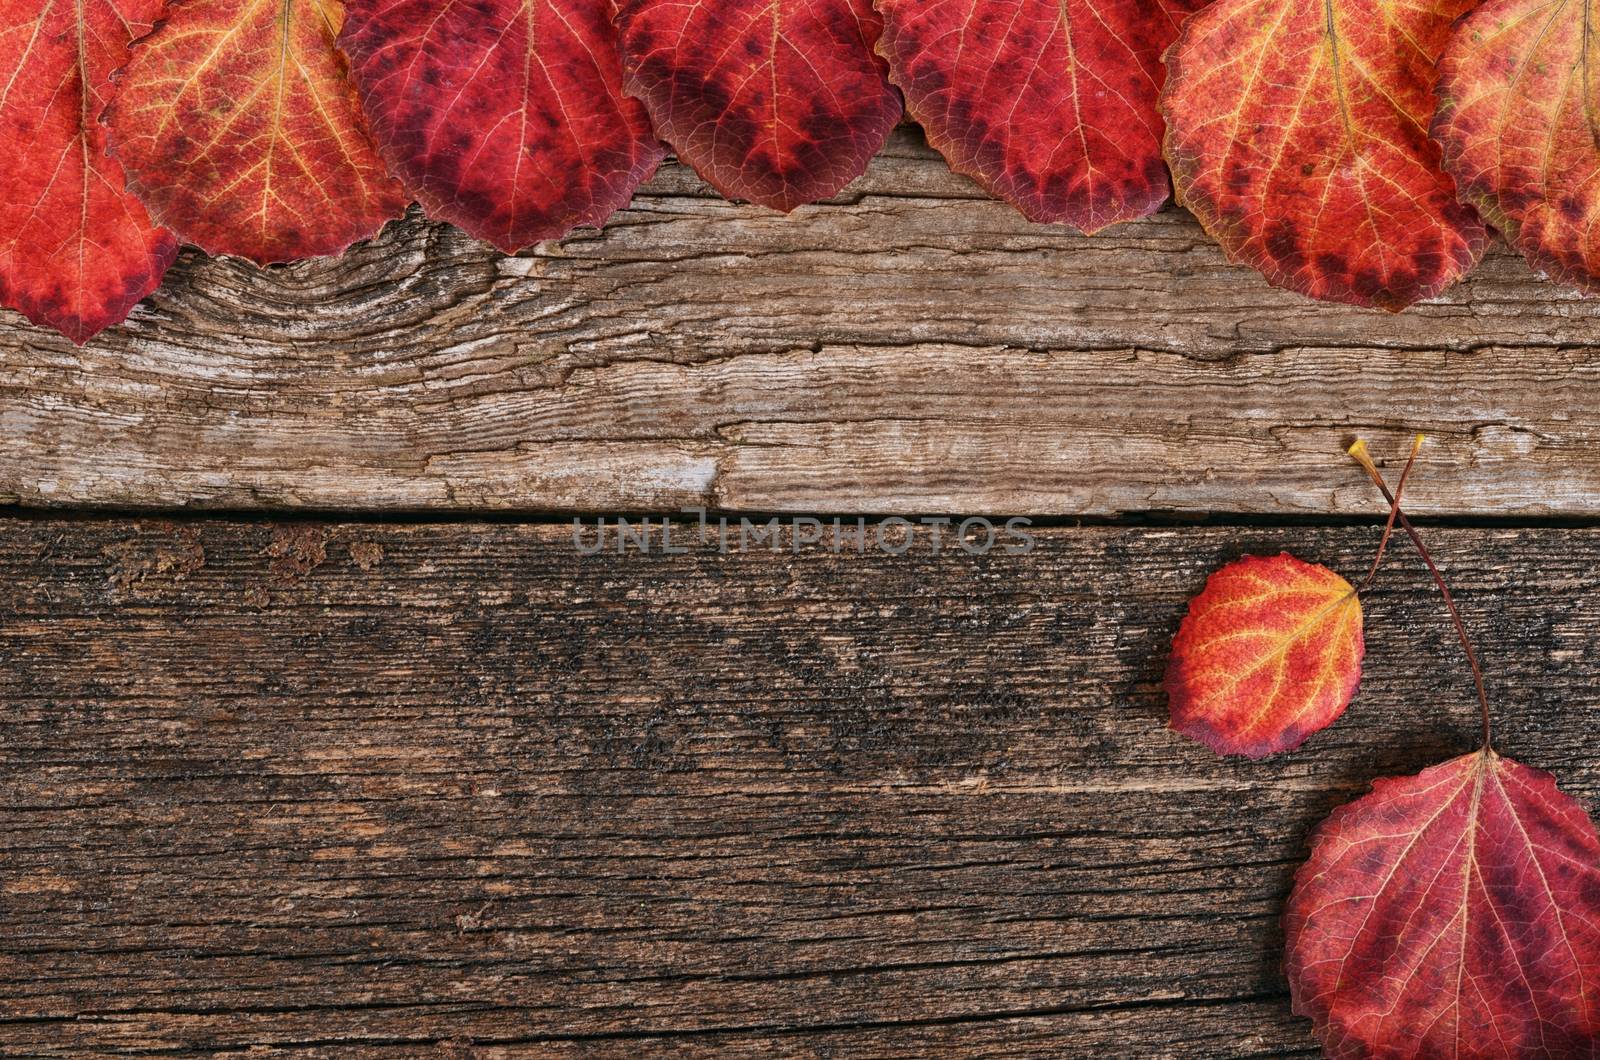 The autumn leaves on a wooden background